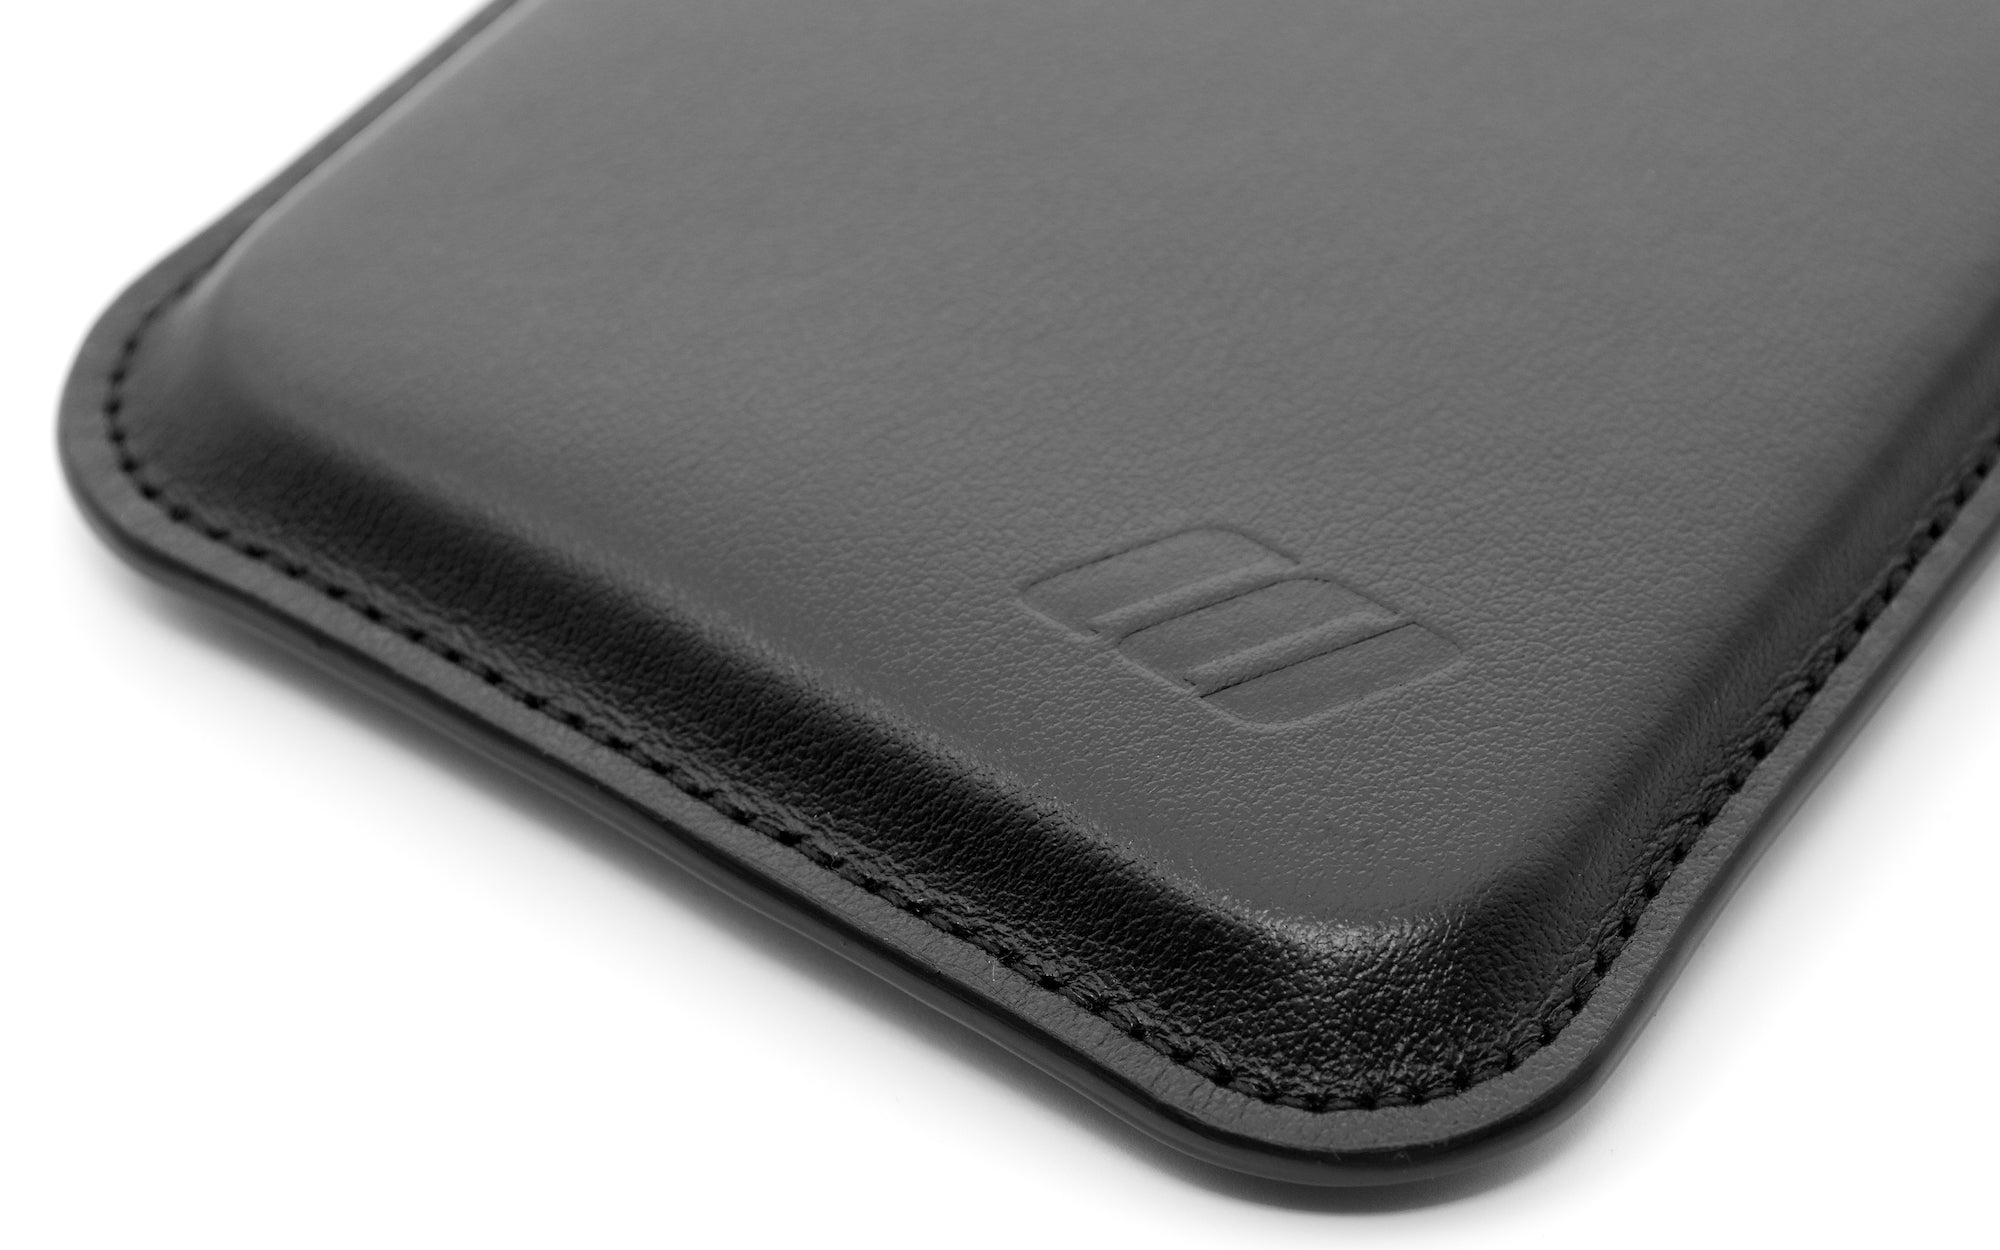 iPhone 12 Pro Max Leather Case Pouch - Skinny Fit - Black